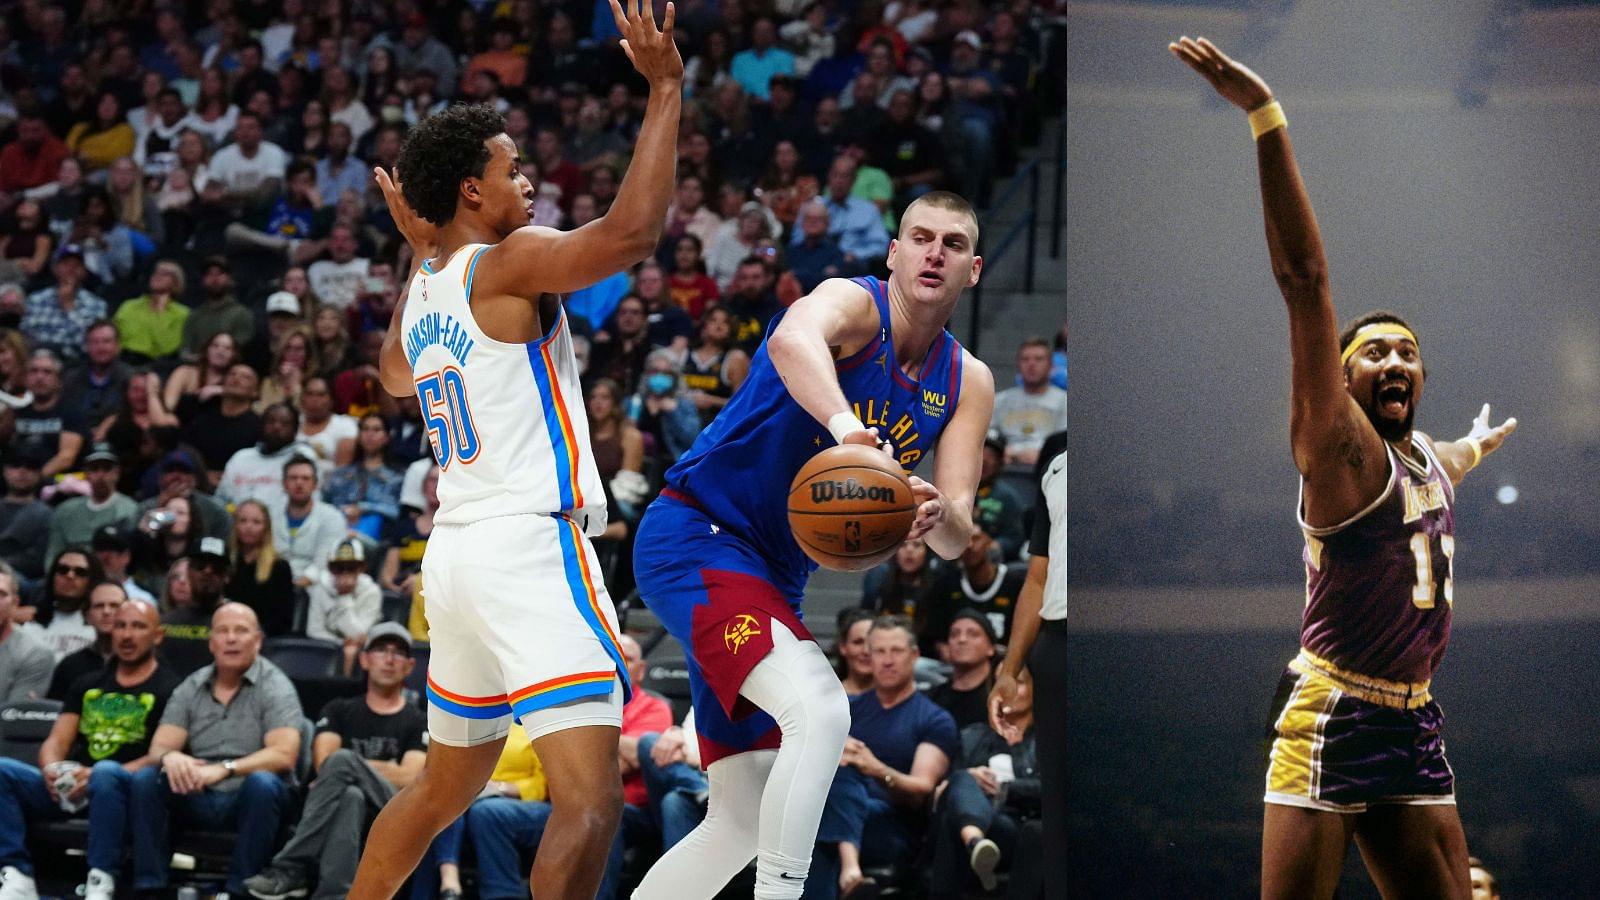 Nikola Jokic Equals Wilt Chamberlain’s Record for Most Triple Doubles by a Center with 78